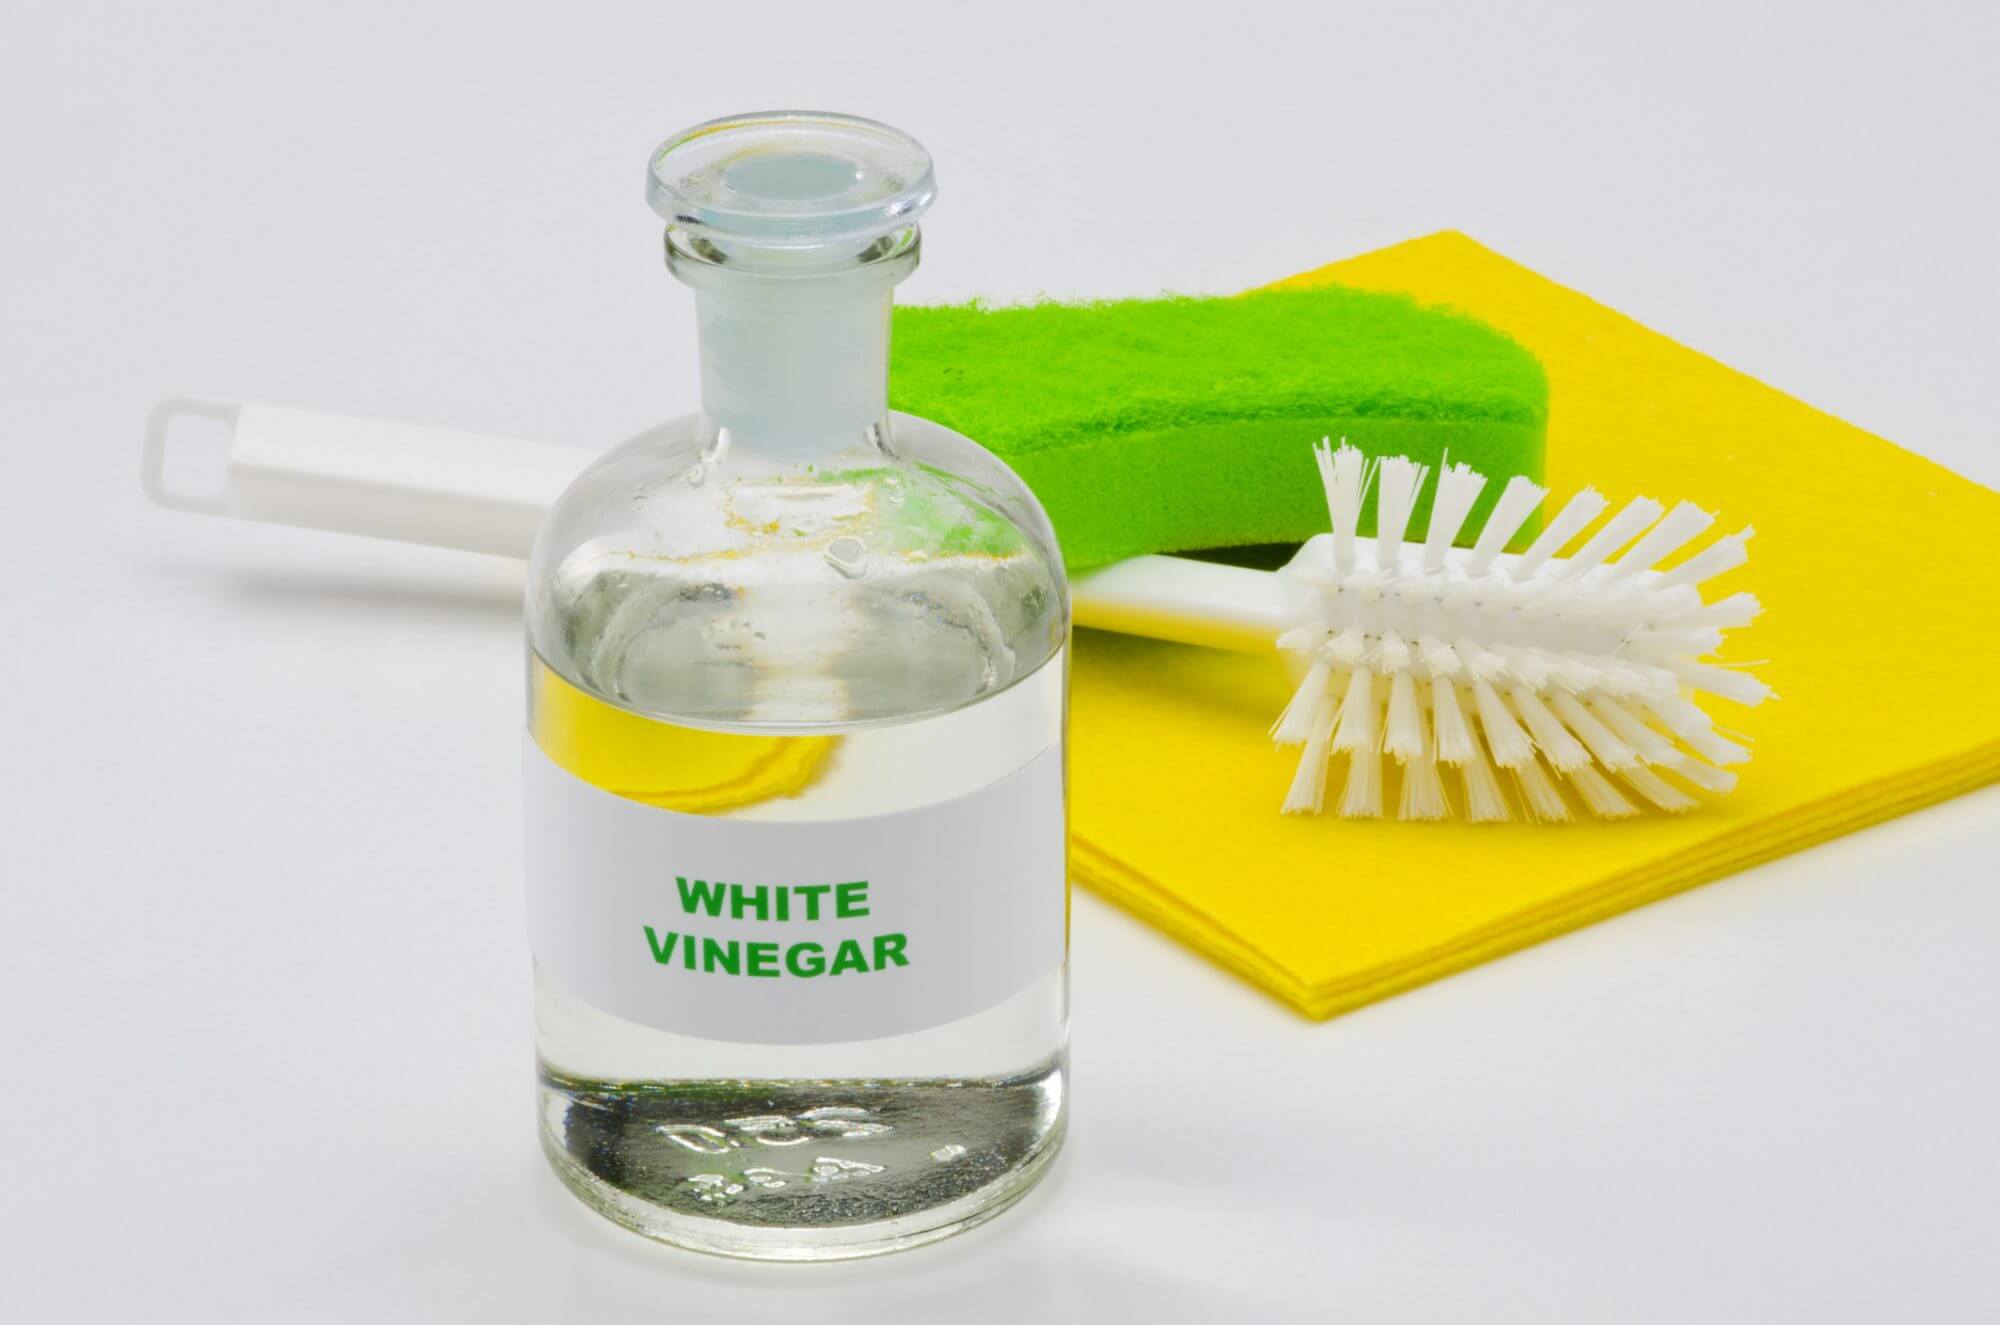 White vinegar is one of the most effective natural cleaners